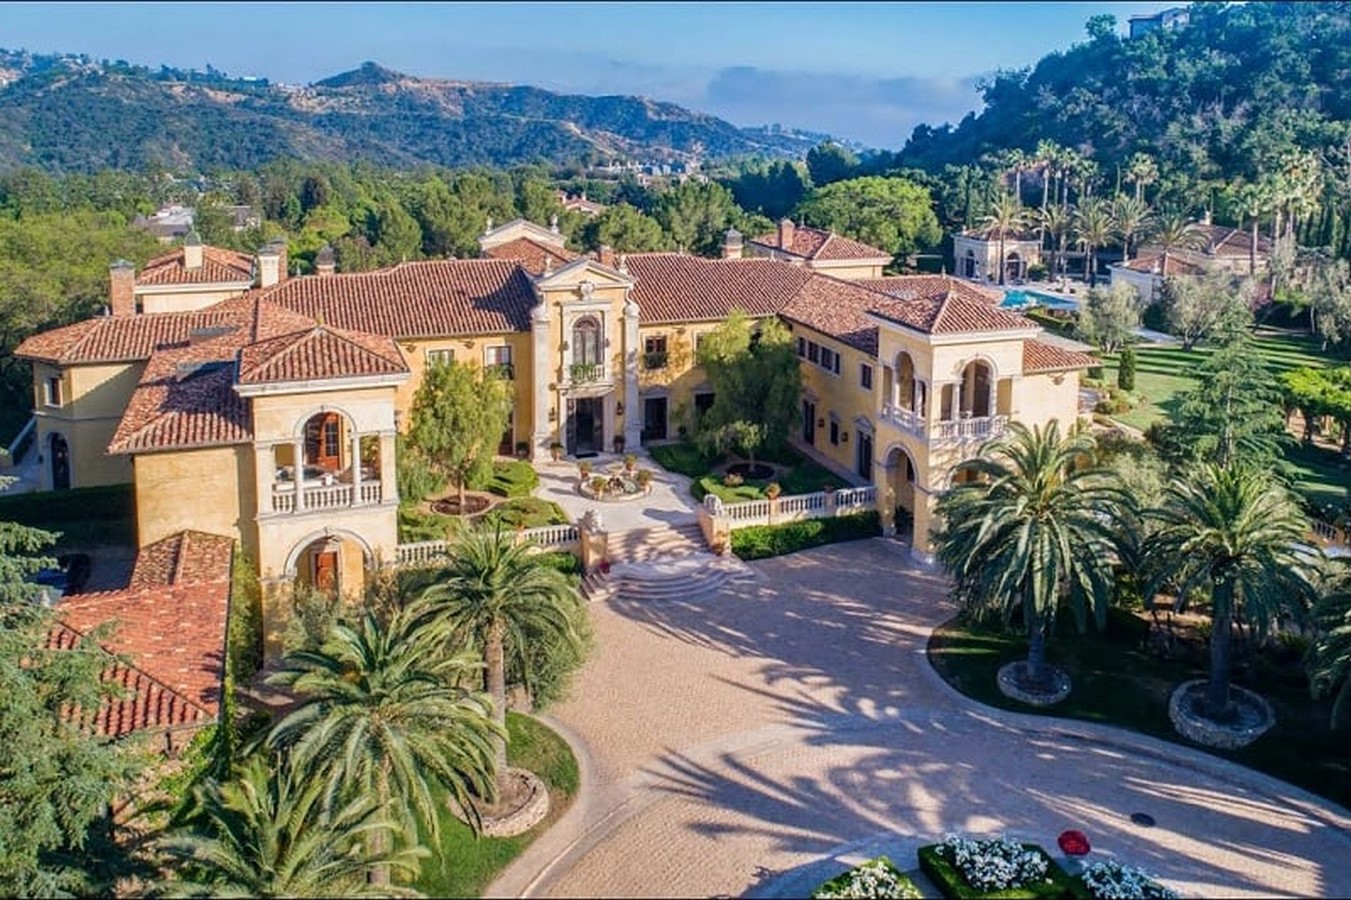 A7978 5 Most Expensive Houses In The US Image 4 